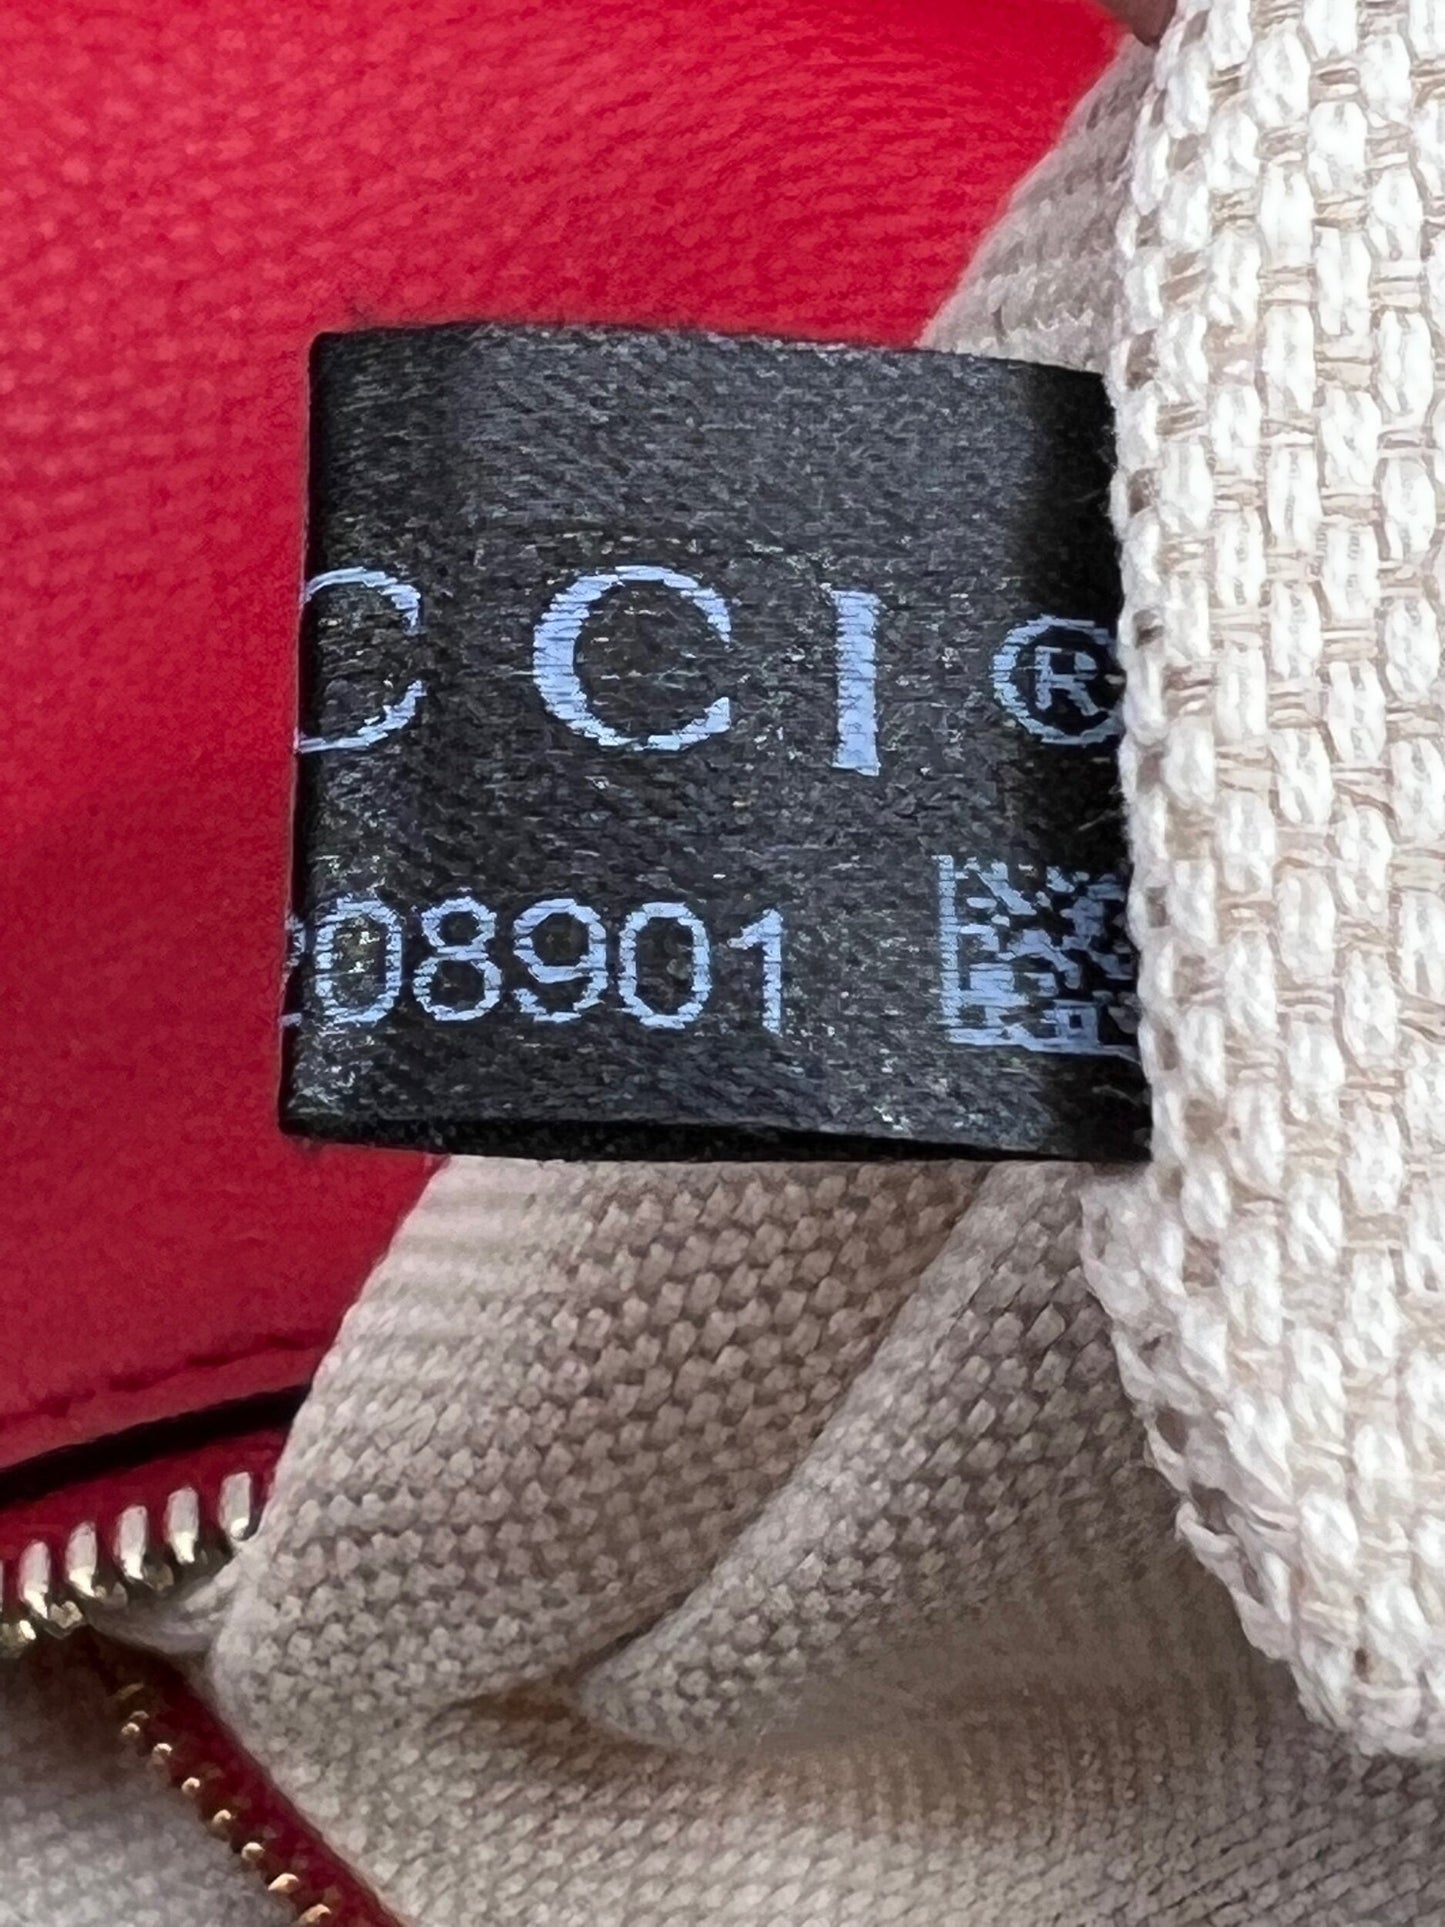 Gucci Pebbled Leather Soho Hobo Bag Red